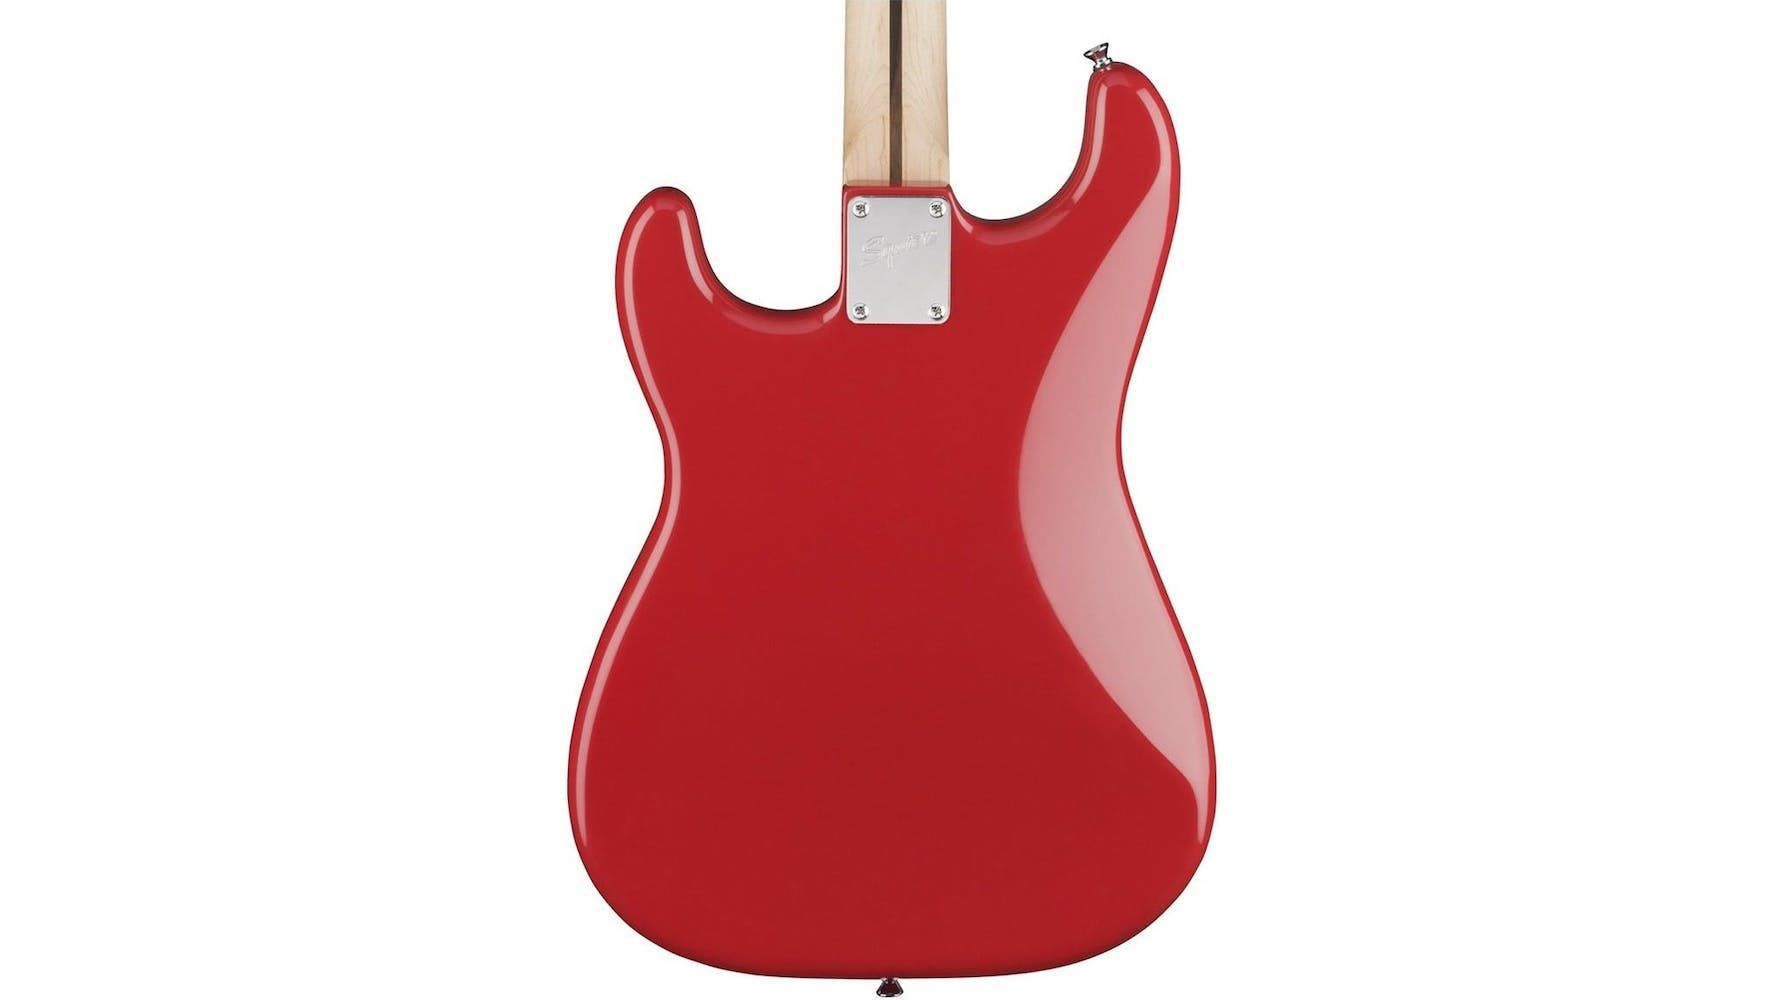 Squier mm stratocaster. Электрогитара Fender mm Stratocaster hard Tail Red. Электрогитара Squier Bullet Stratocaster HT Red. Электрогитара Squier Bullet Strat by Fender Red. Fender Squier mm hard Tail Red.